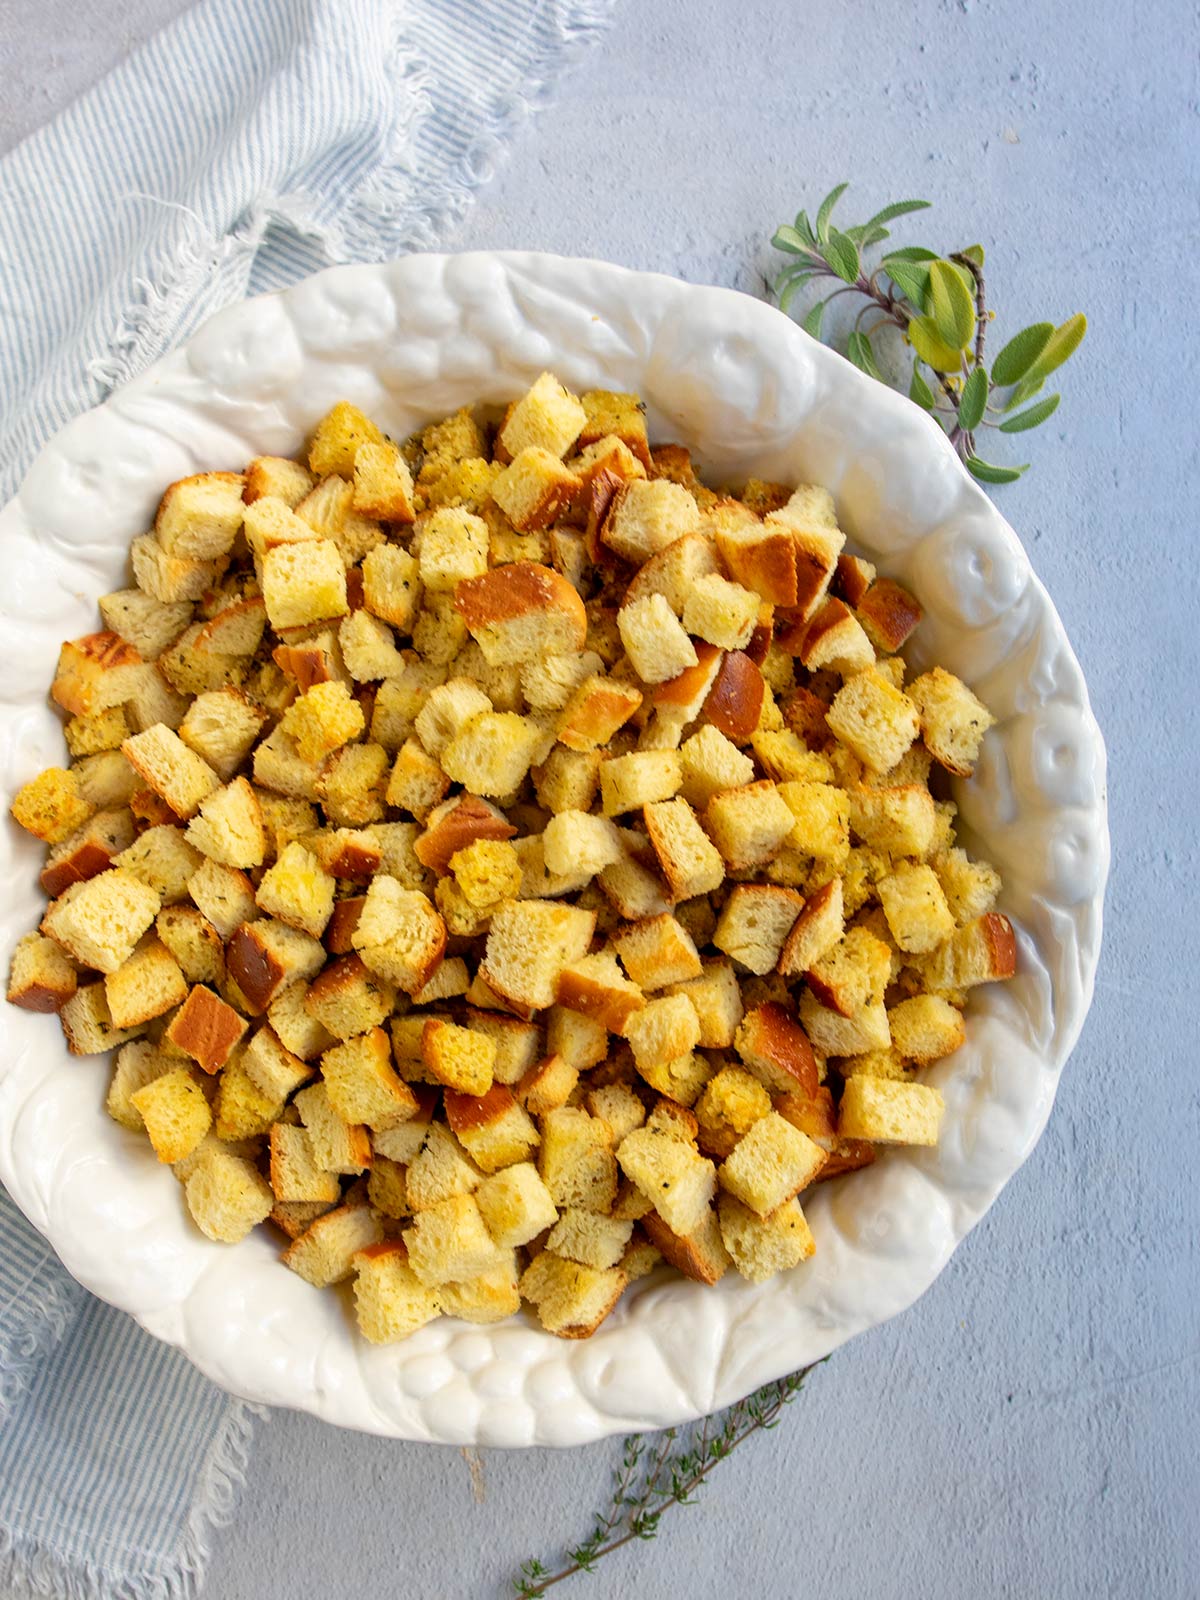 Large white bowl with baked stuffing cubes with fresh herbs and a striped napkin nearby.